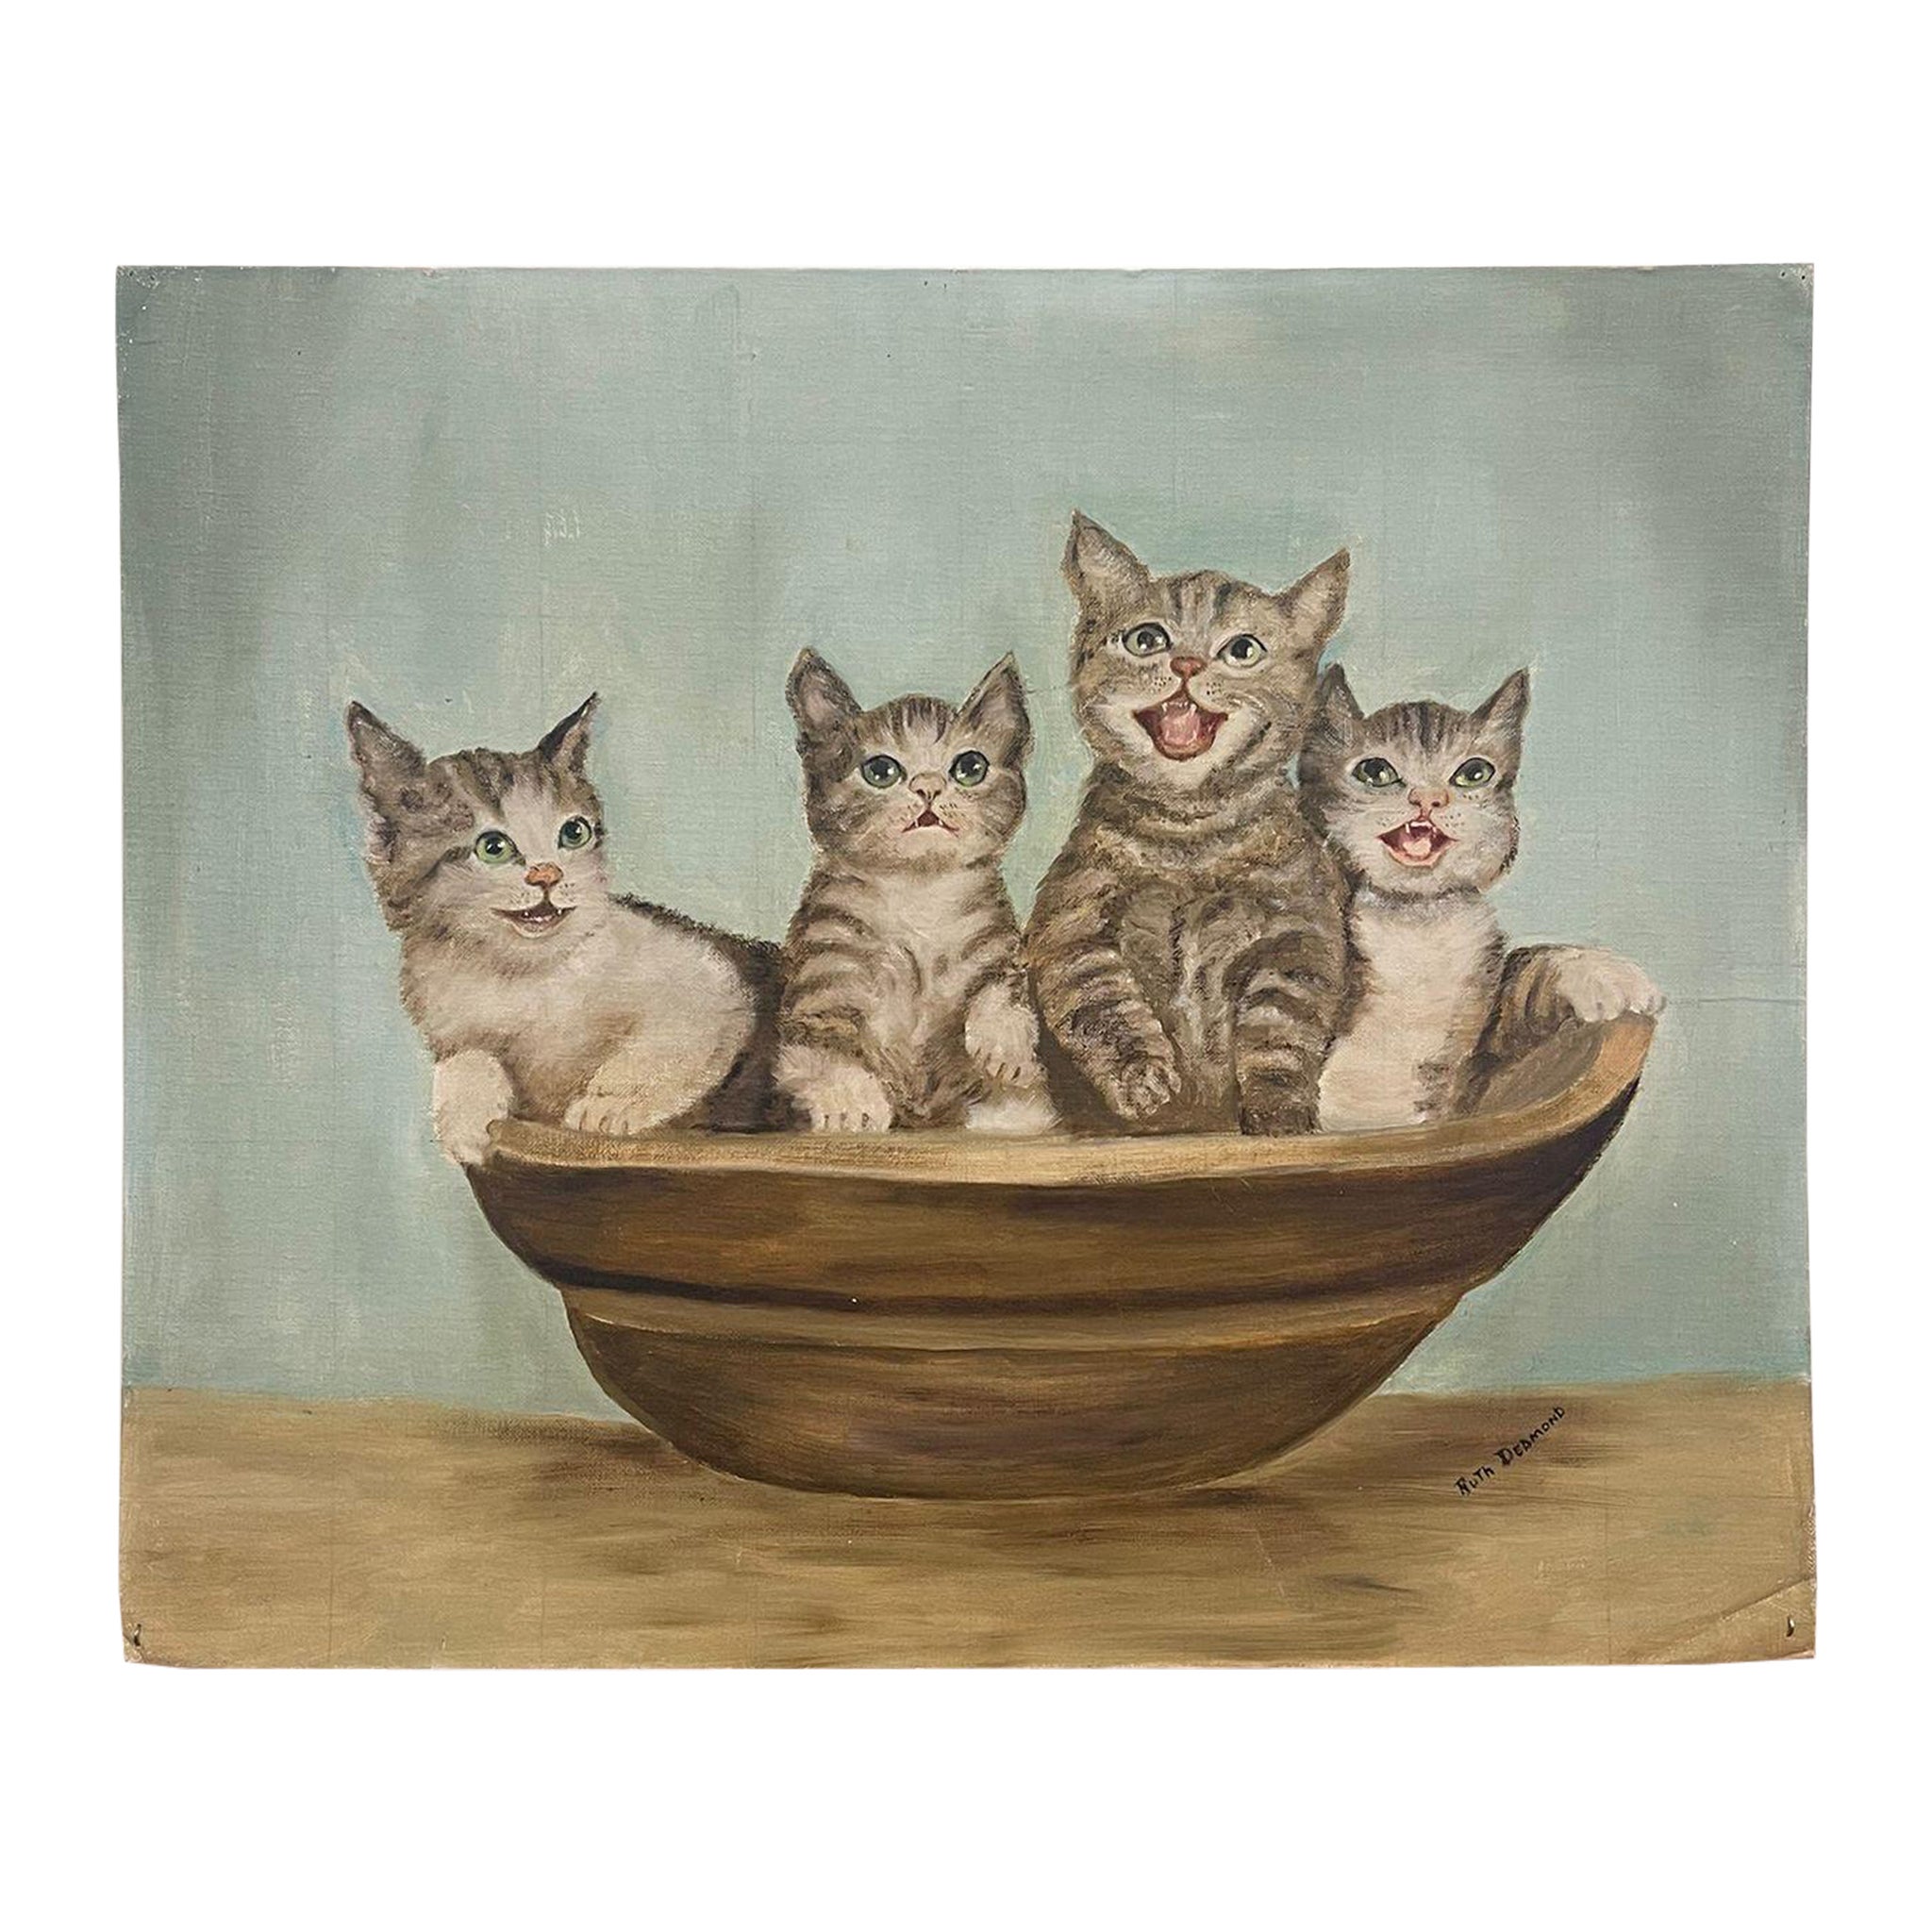 Vintage Signed Original Painting of Kittens in a Basket.